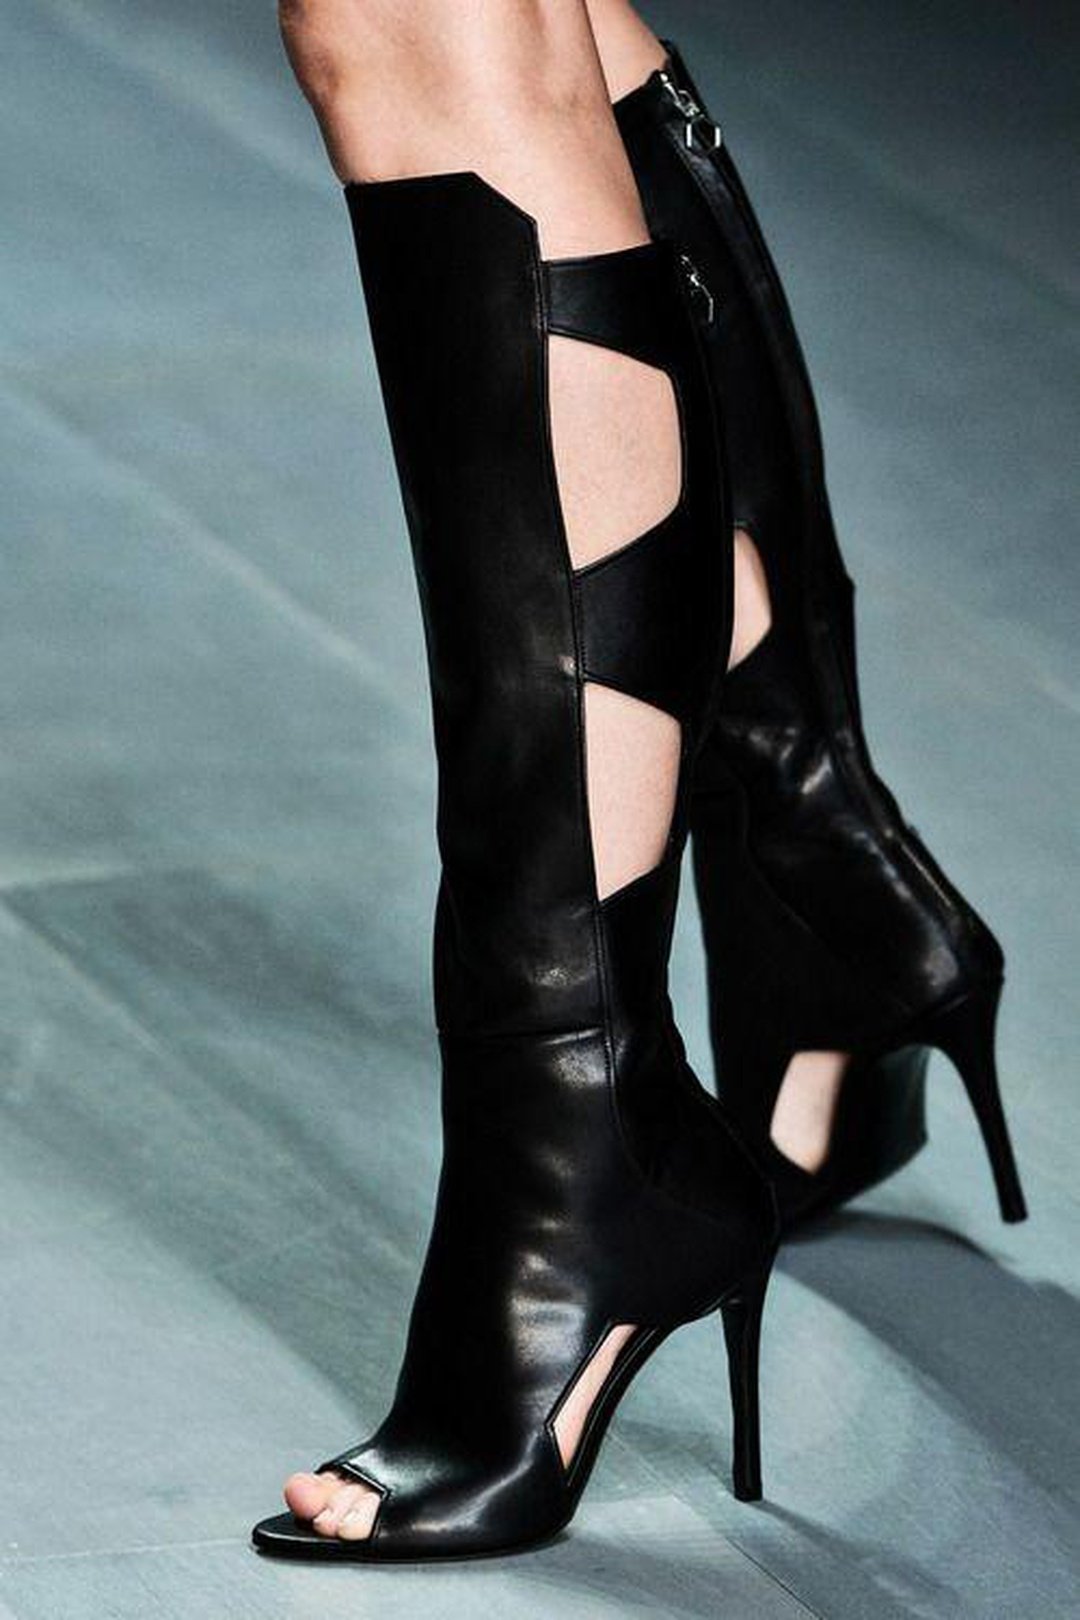 Crixus - Gladiator Boots - In Black Only